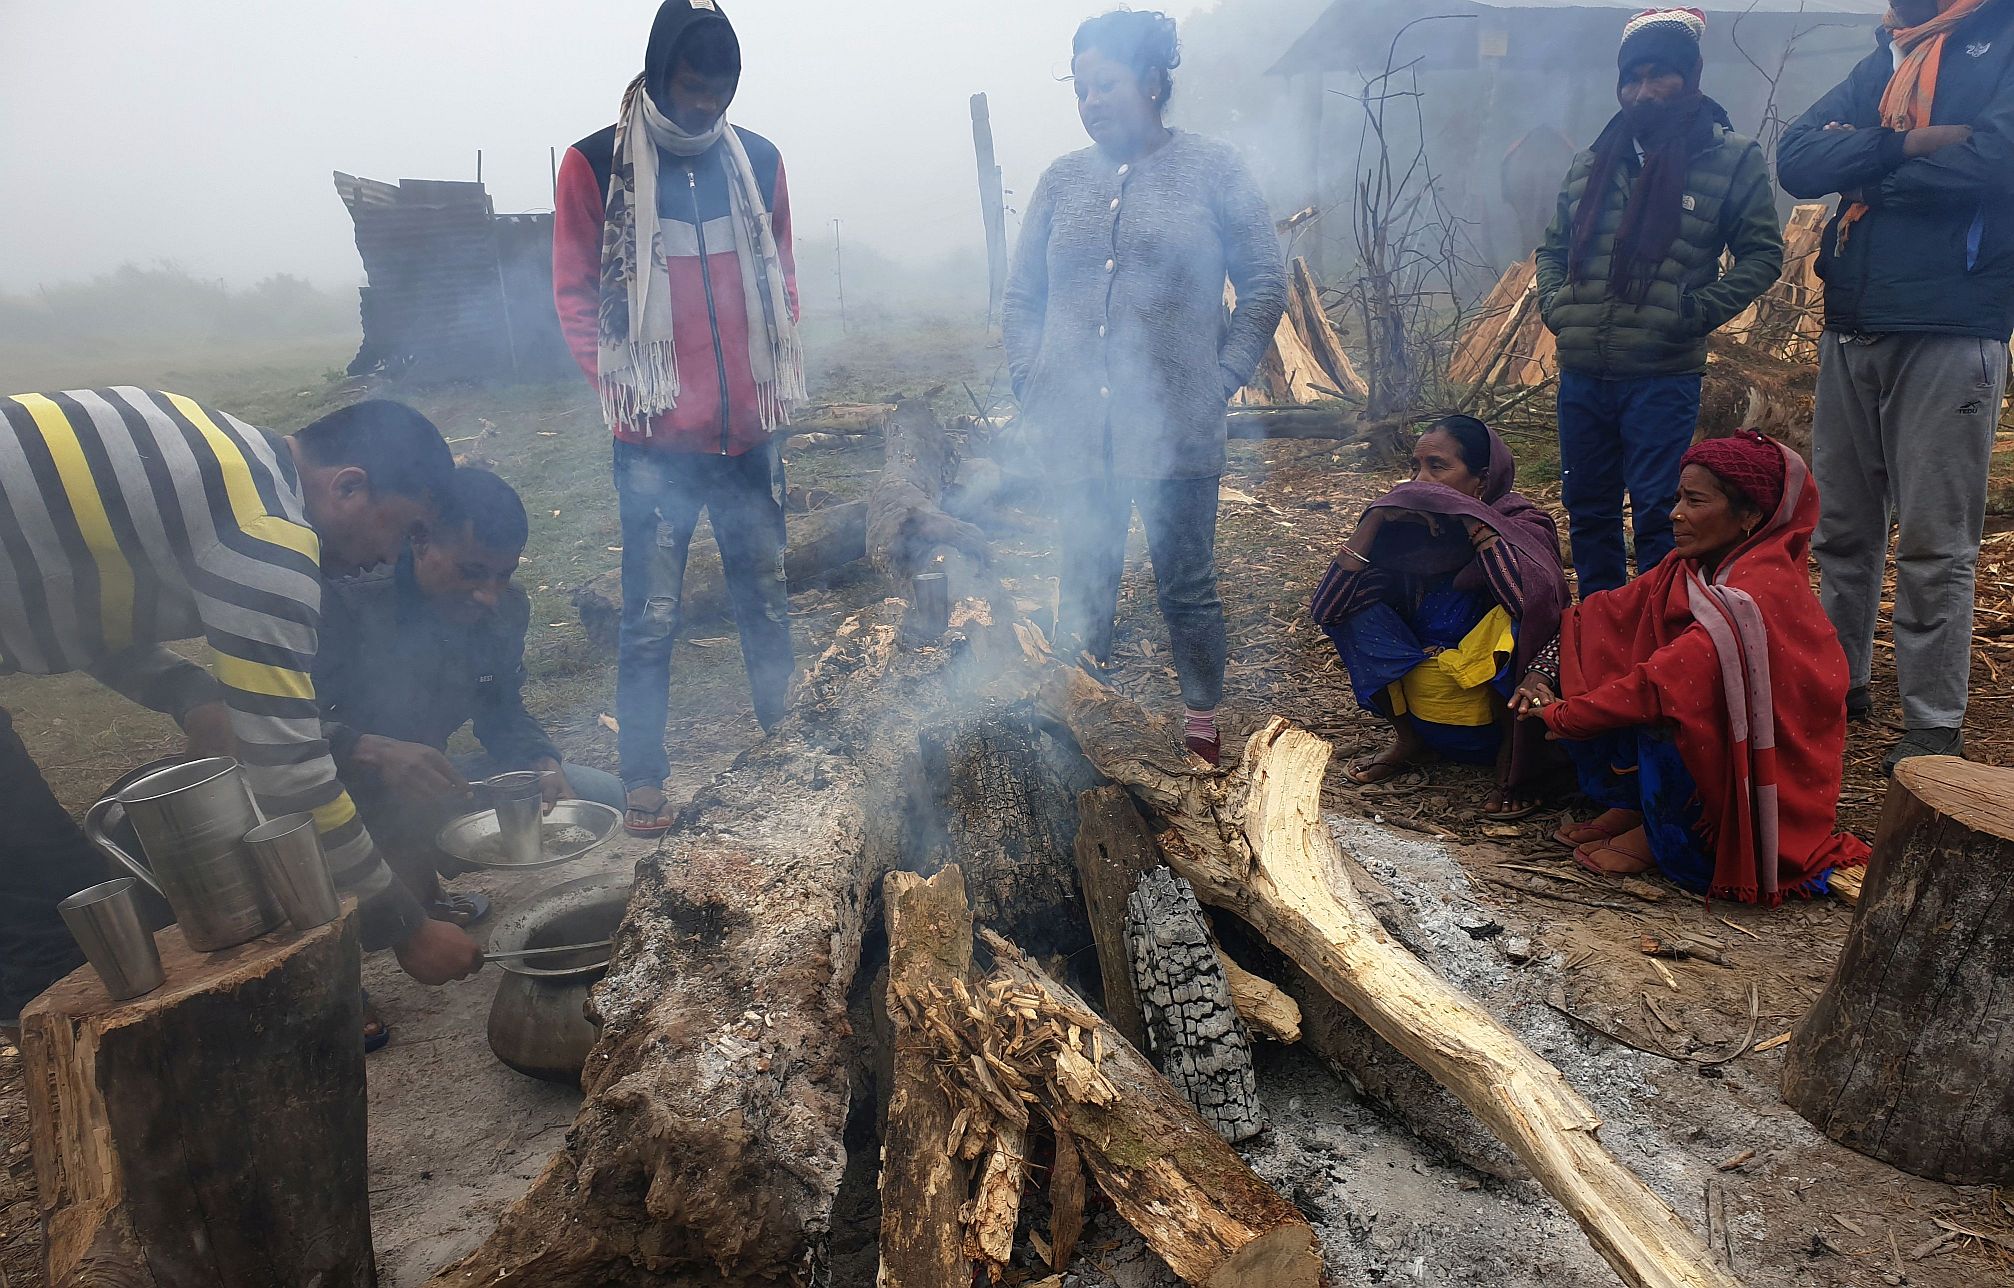 People warm themselves by a fire in Nepal